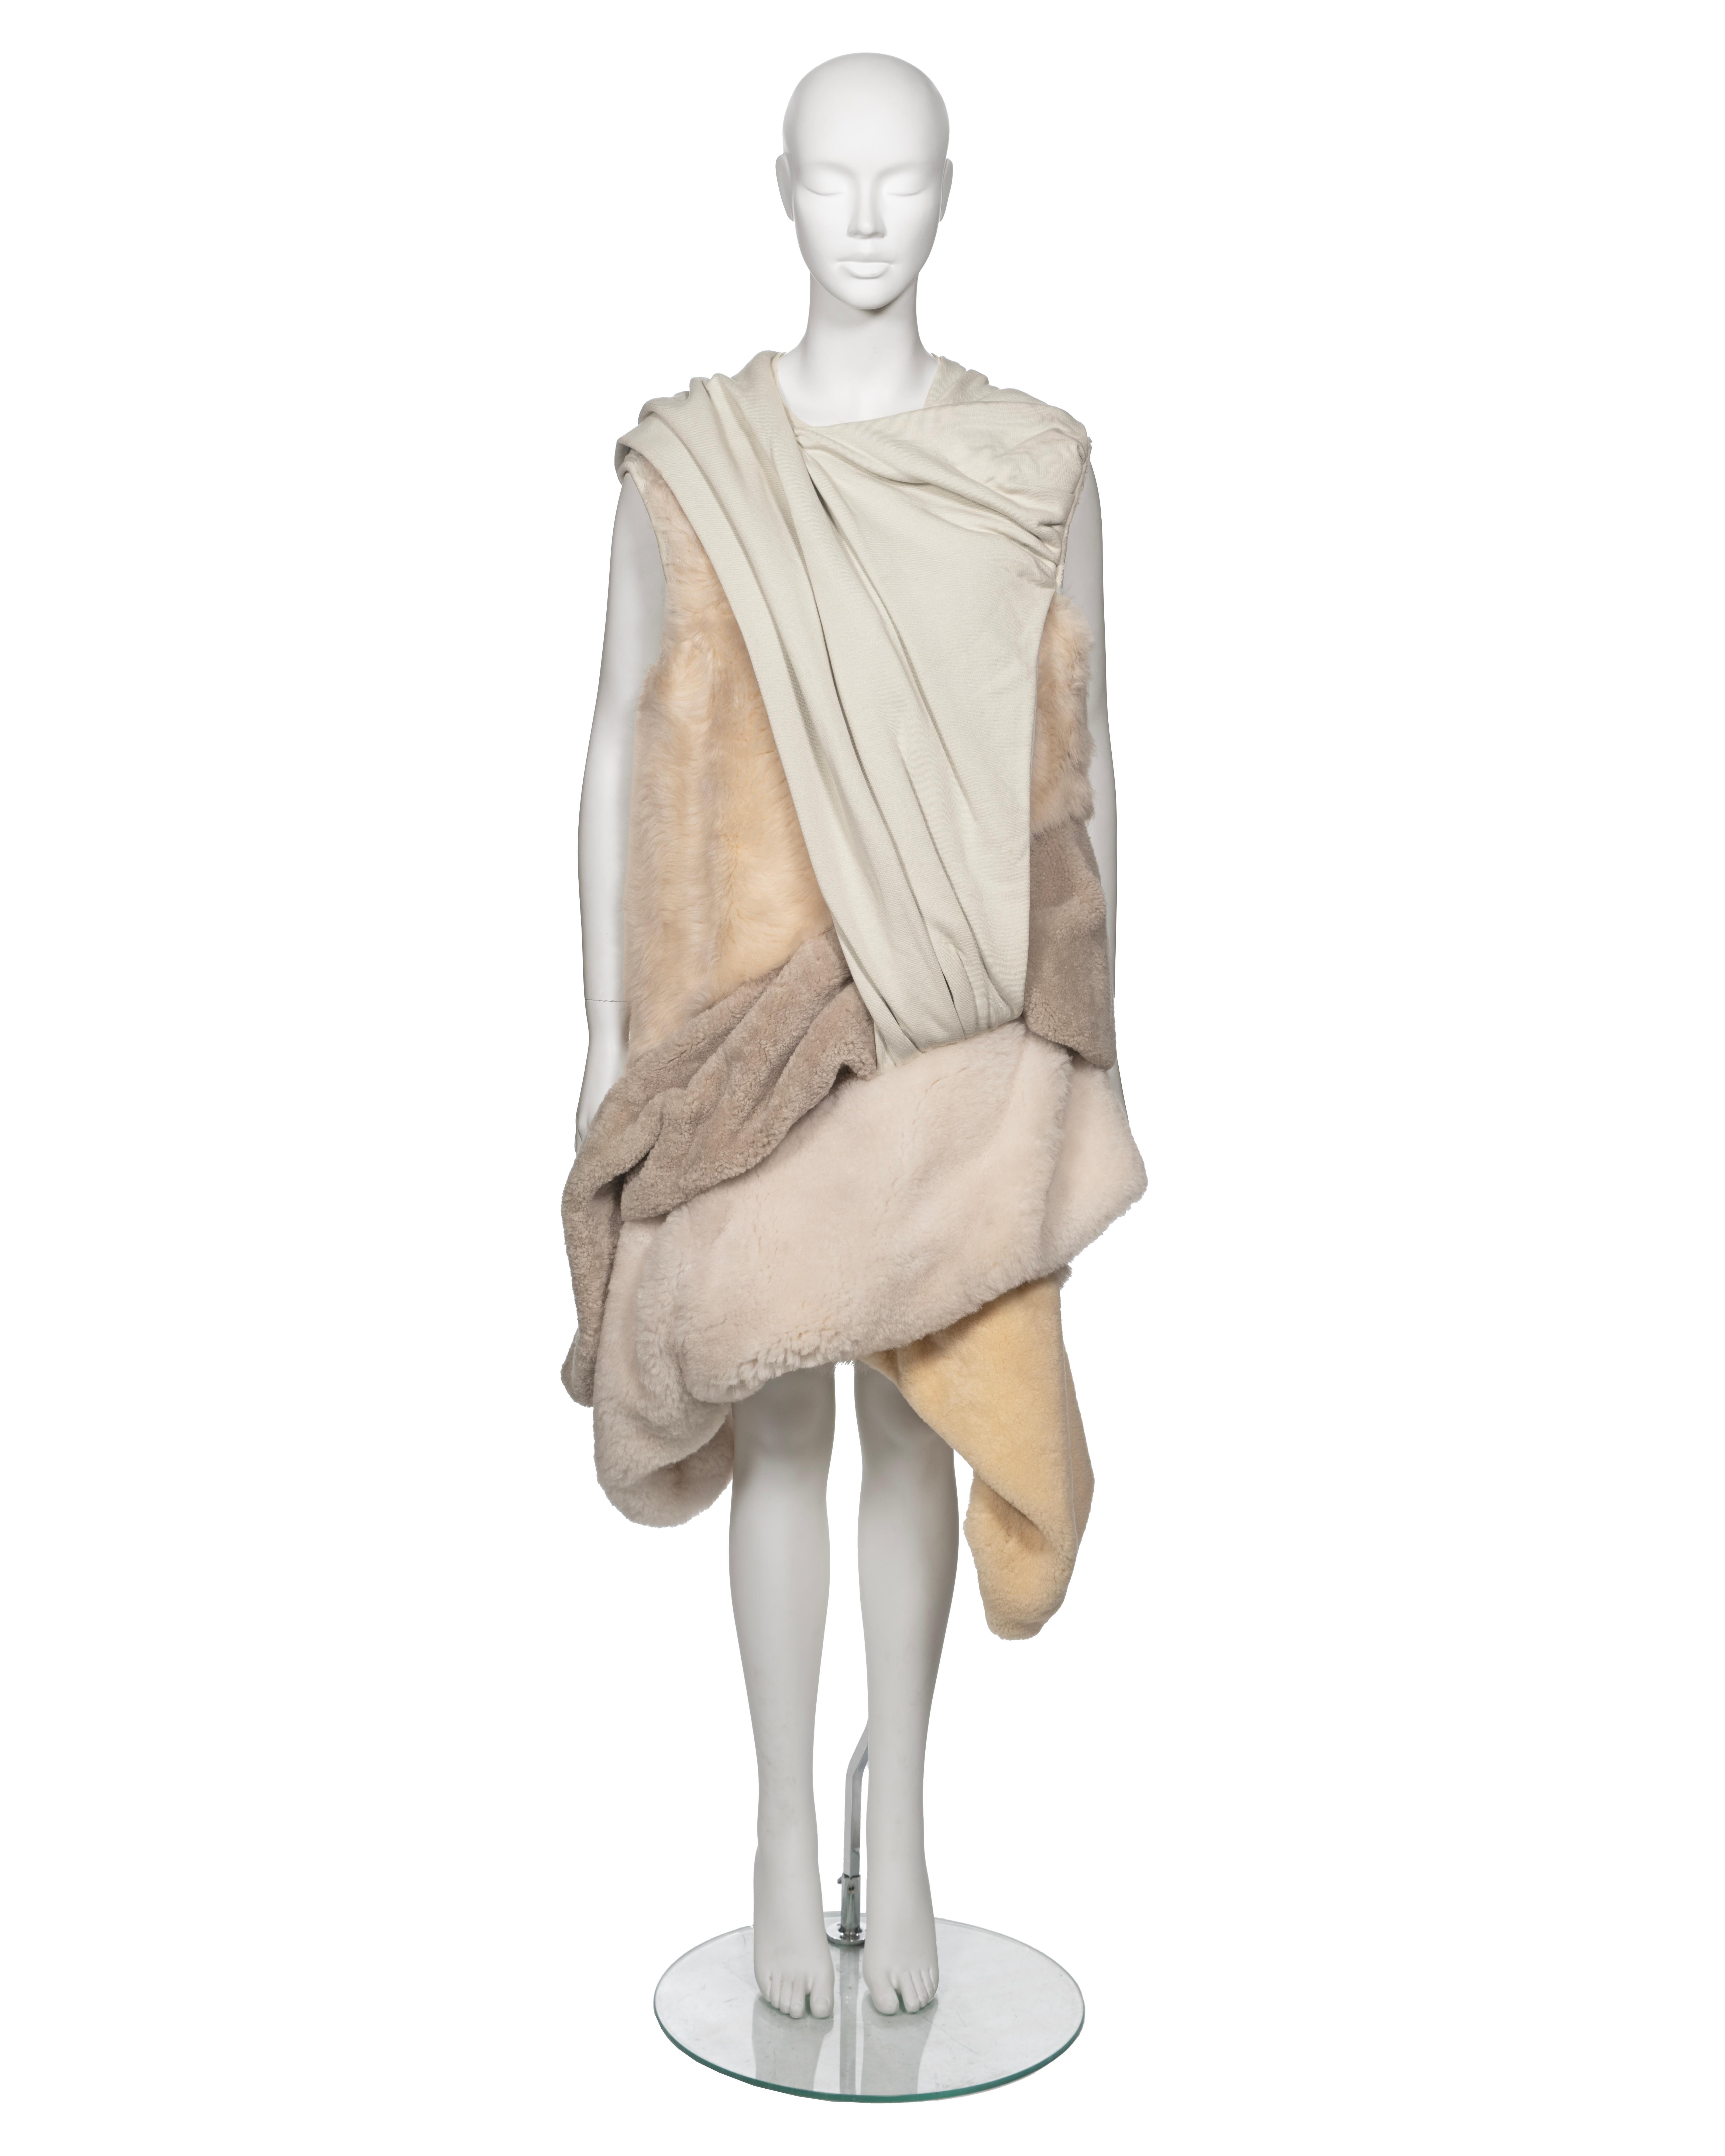 ▪ Archival Rick Owens 'Mastodon' Dress
▪ Fall-Winter 2016
▪ Sold by One of a Kind Archive
▪ Crafted from intricately intertwined layers of draped shearling, sheepskin, and thick cotton jersey
▪ Boasts an oversized fit
▪ Robust heavyweight